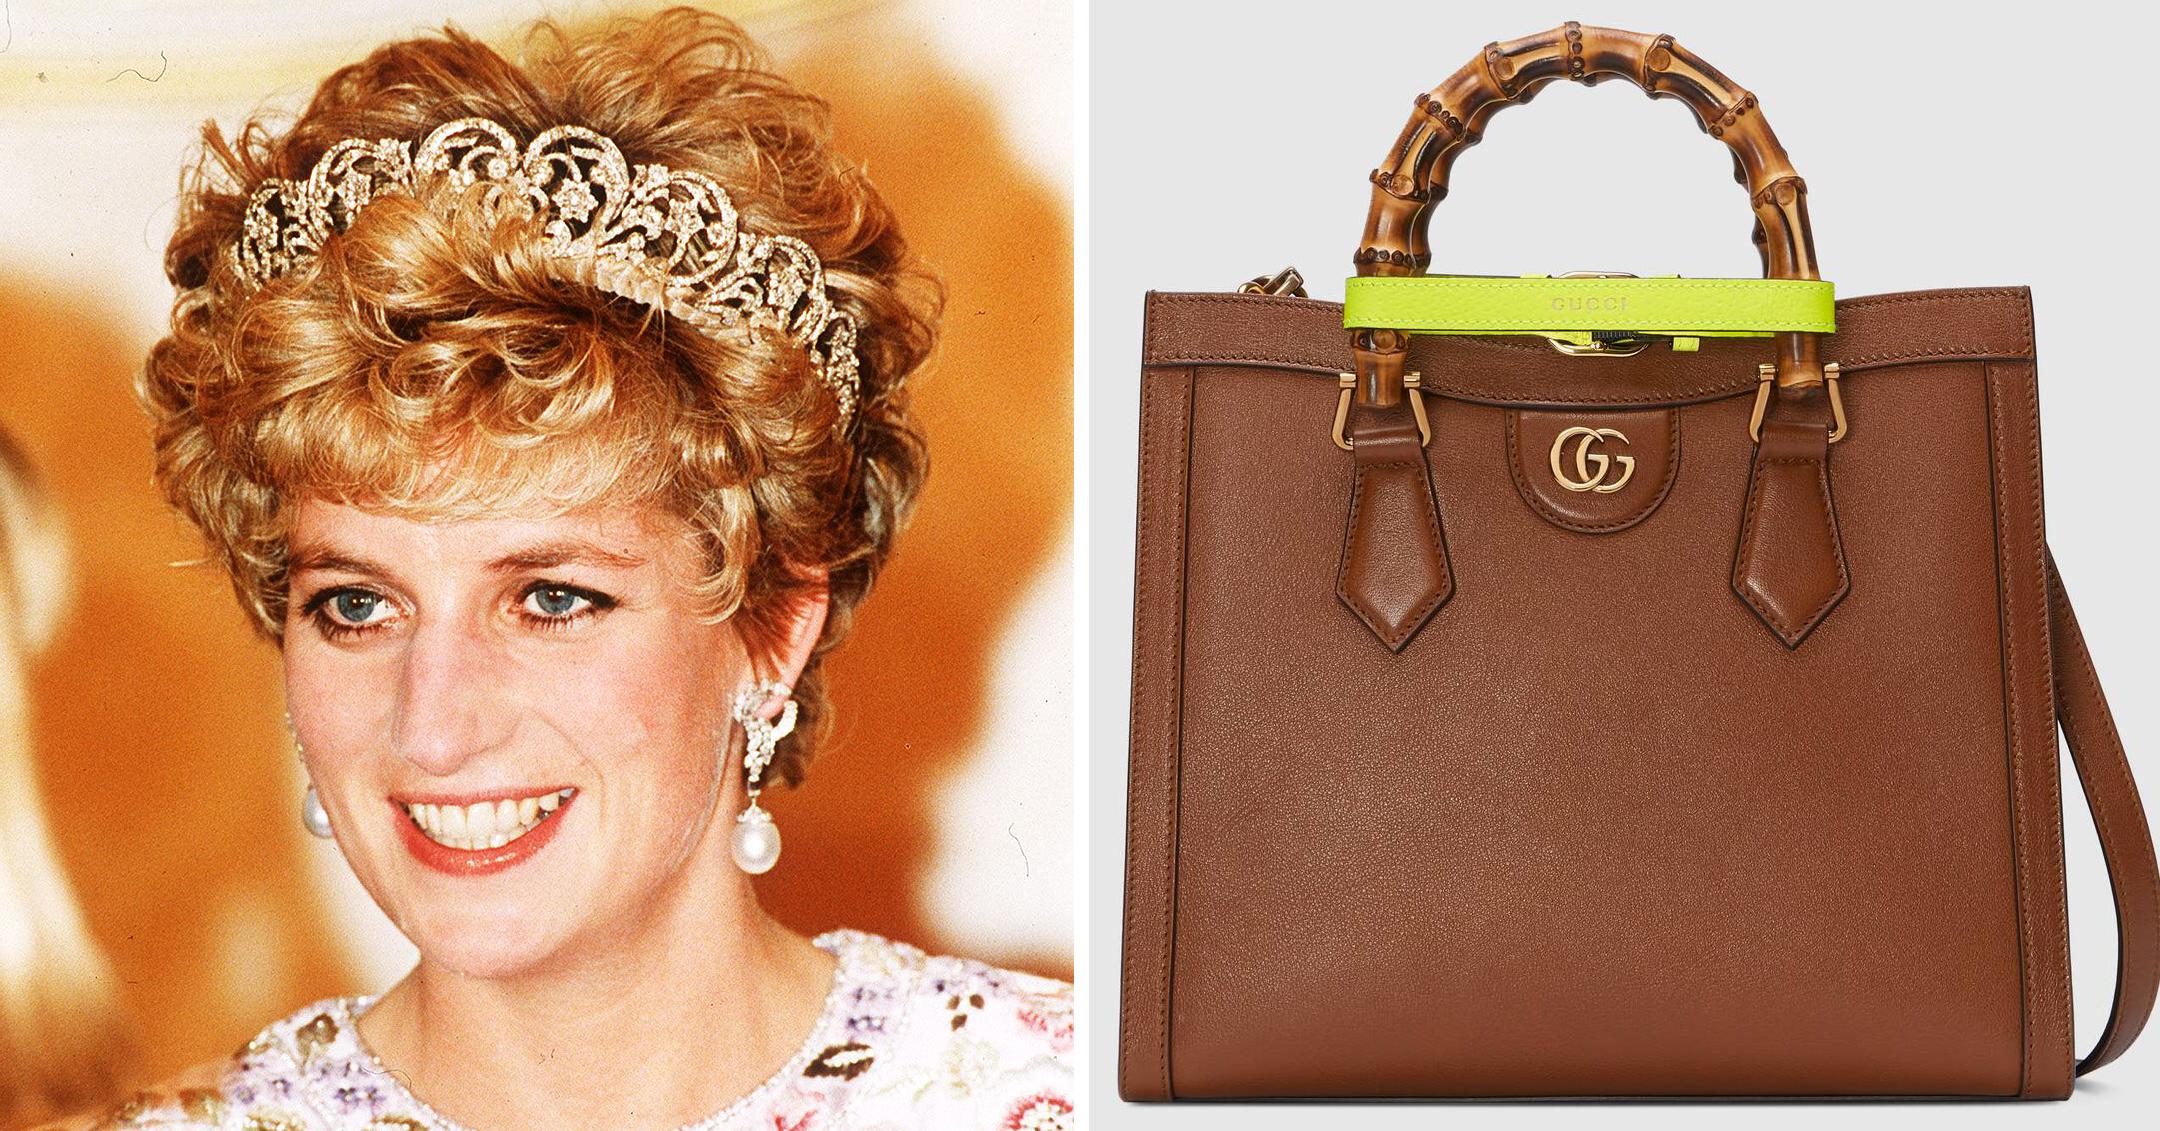 Gucci has reinvented the classic handbag that was Princess Diana's  favourite in the '90s